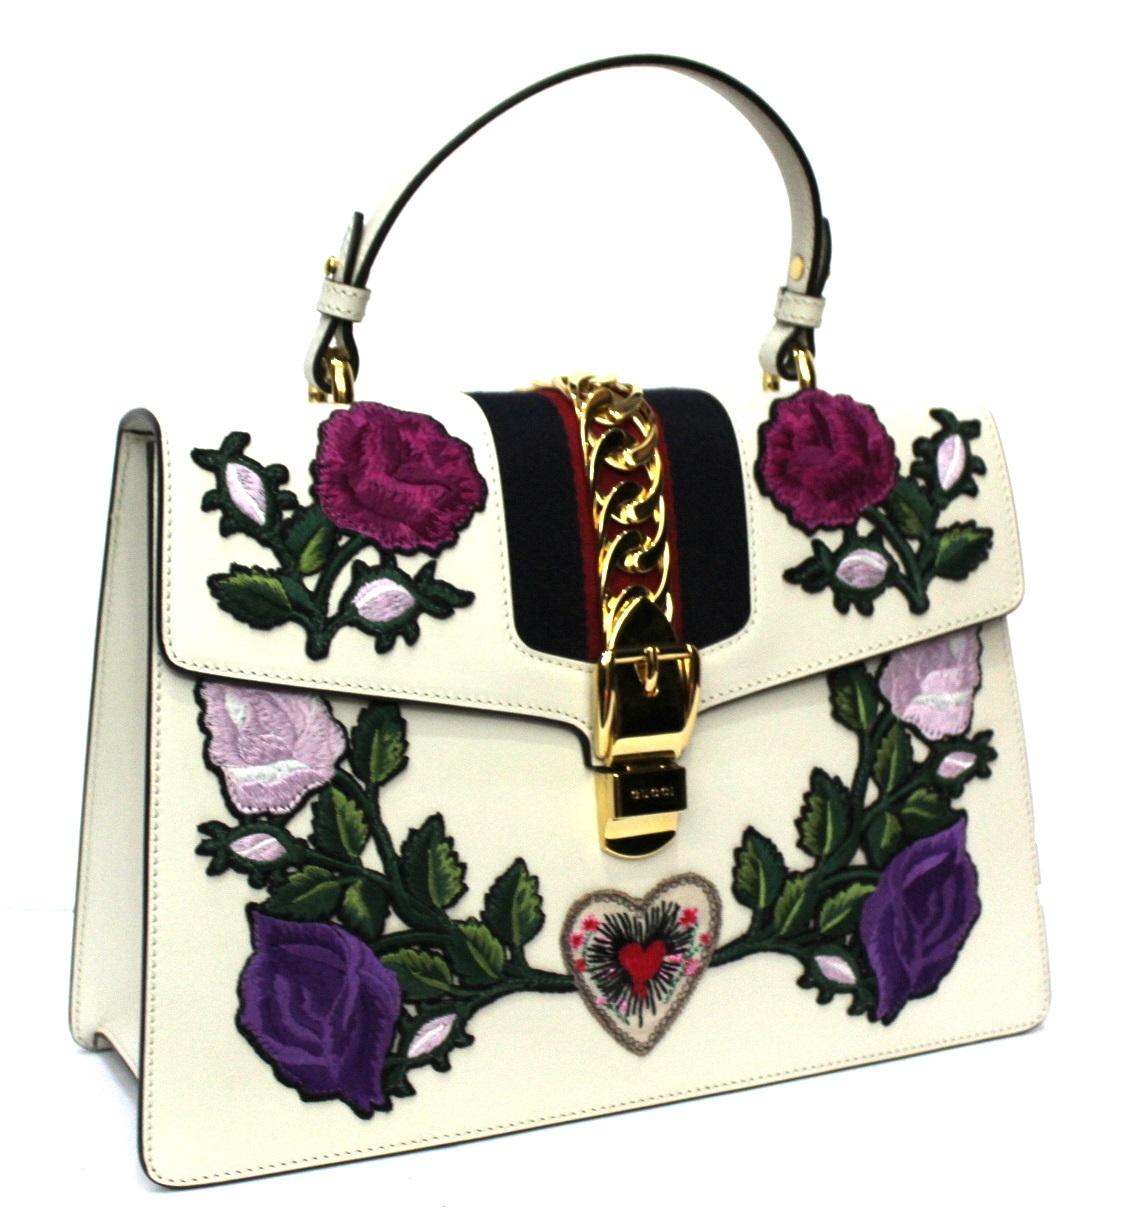 Gucci Sylvie model bag made of white leather with flower embroidery and web band decoration.

Leather handle and shoulder strap. Internally quite large.

Beautiful and impactful, like new condition.